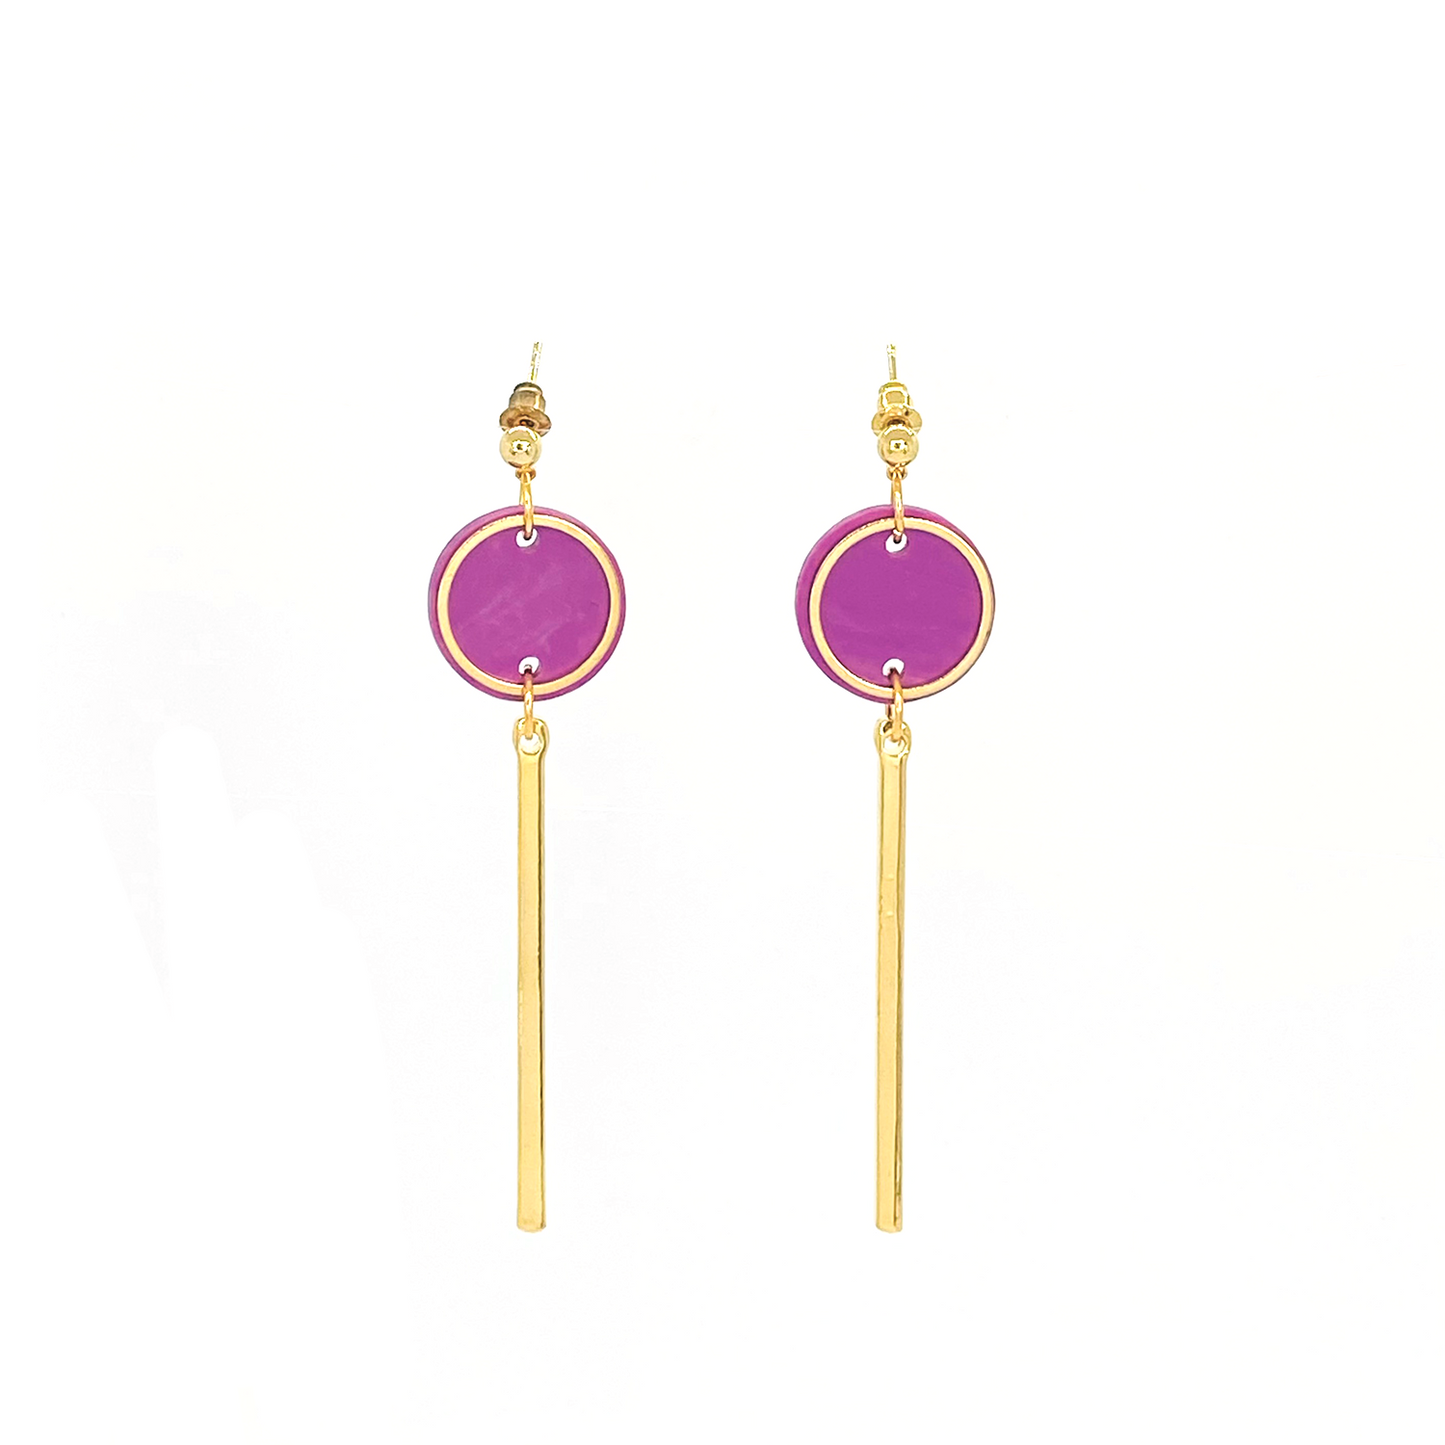 Rise Earrings- Radiant Orchid